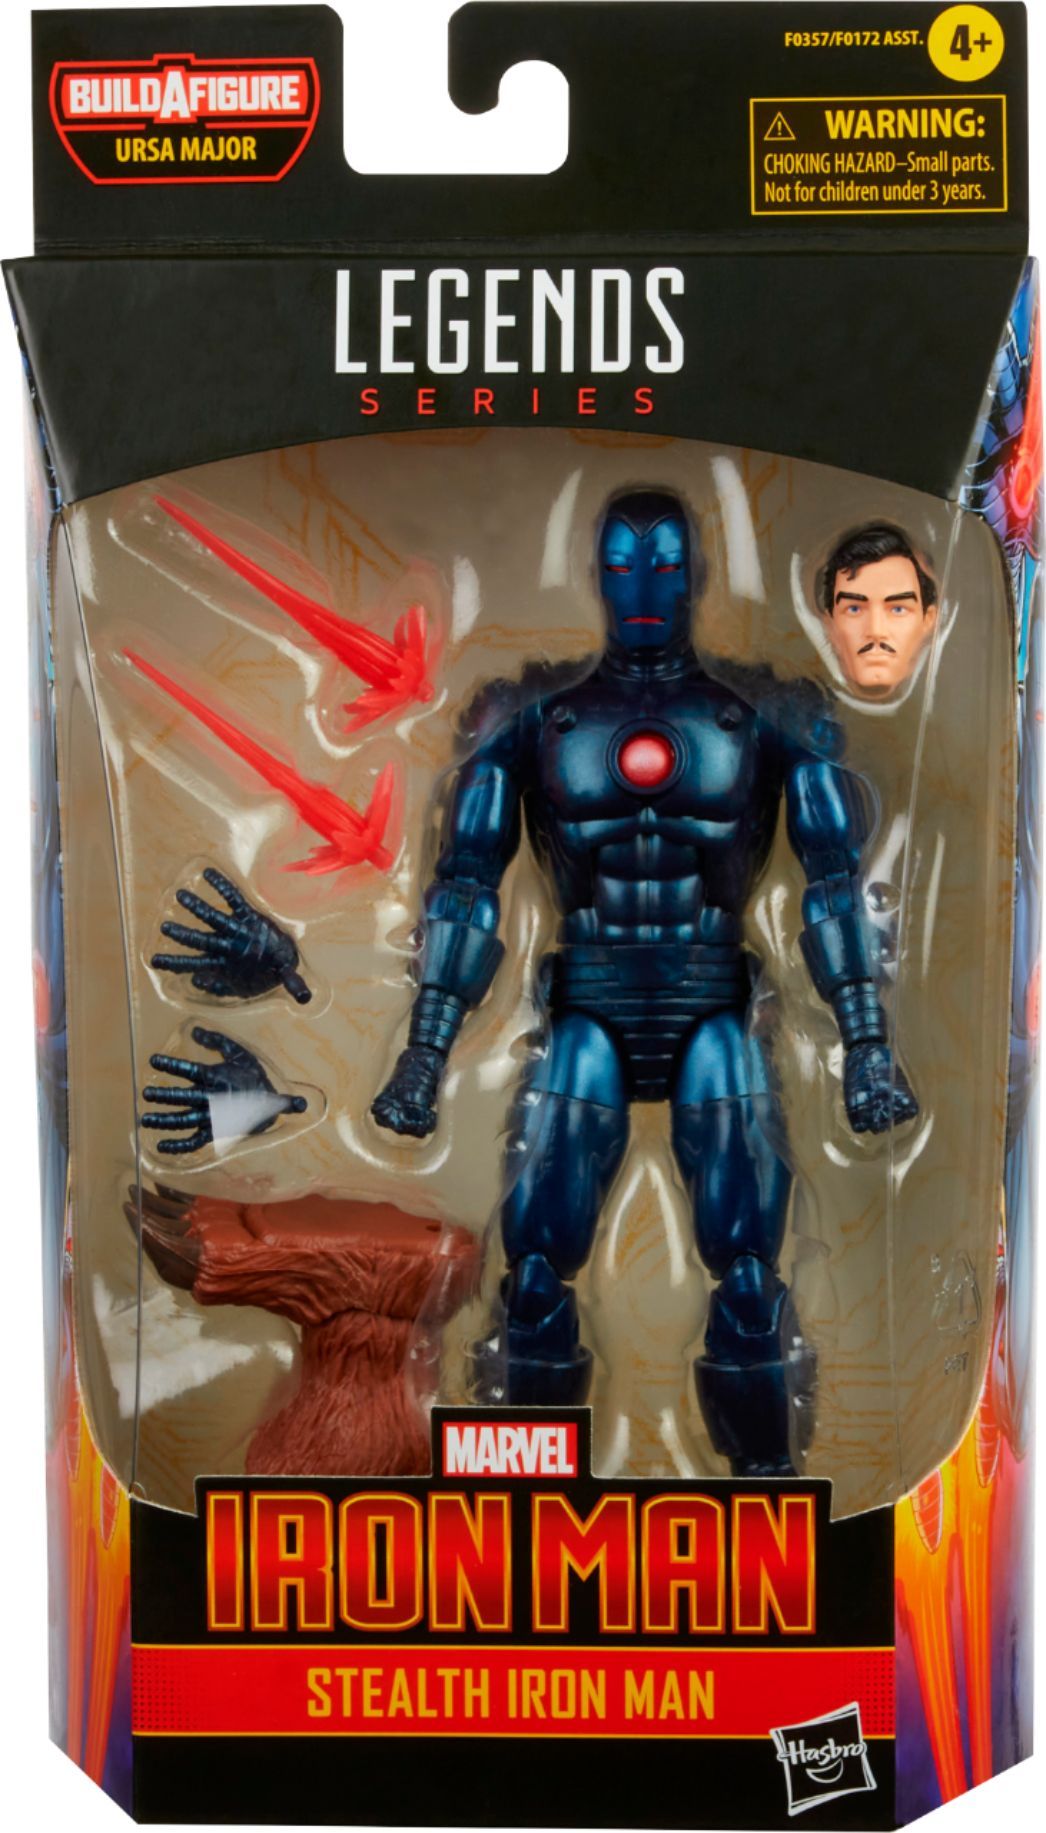 Marvel Legends - Iron Man Series 1 - Iron Man (Stealth Suit) - Hasbro action figure collectible - Main Image 1